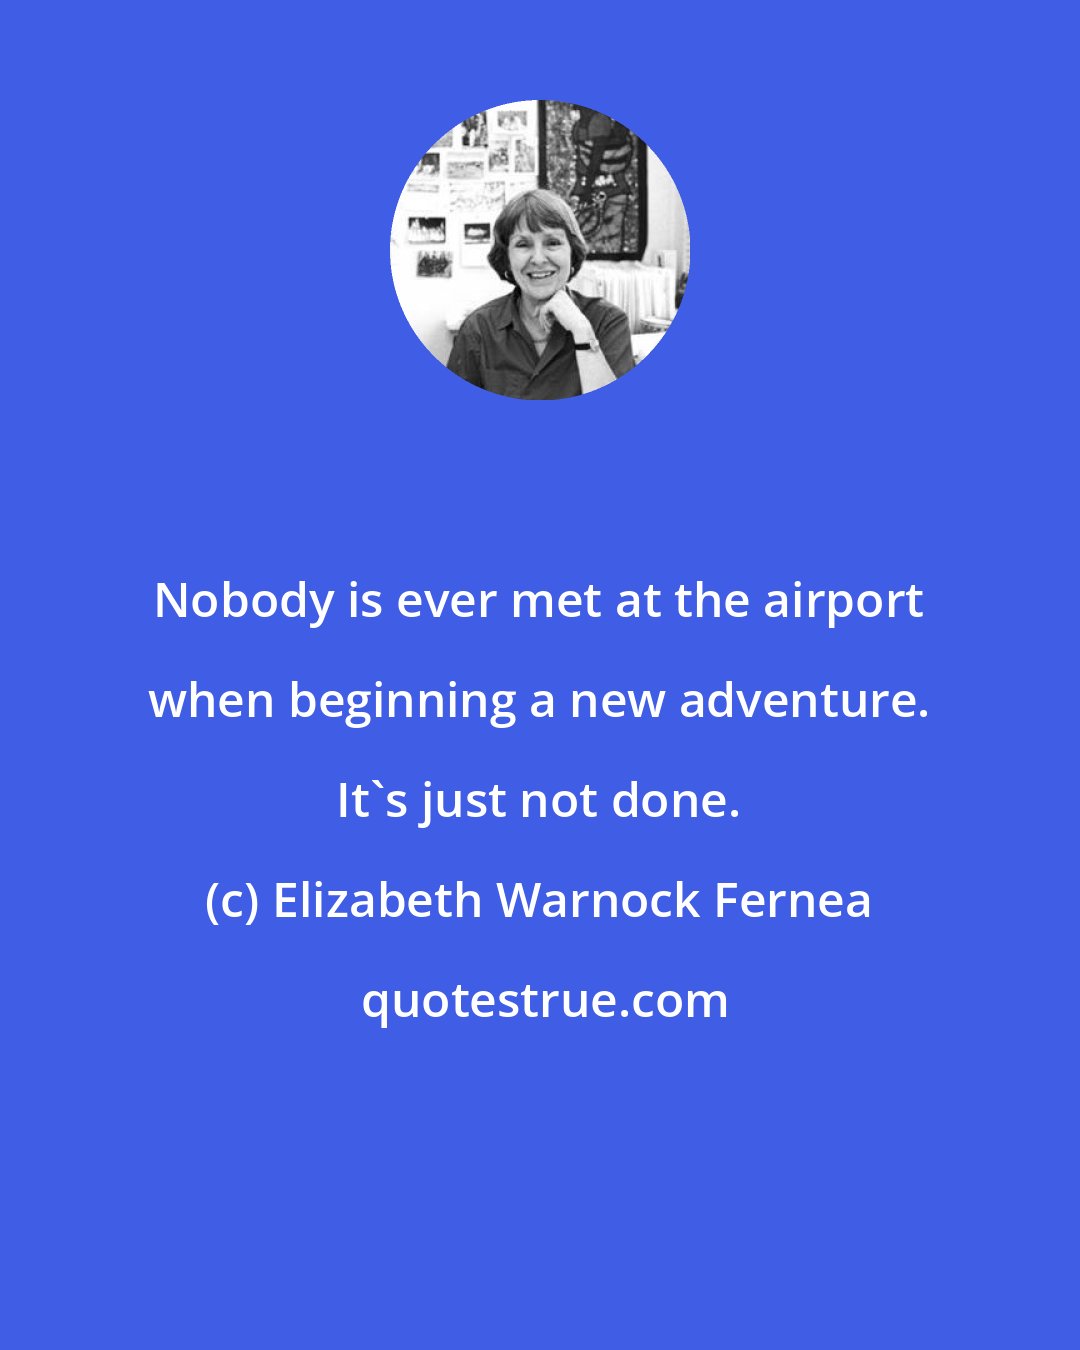 Elizabeth Warnock Fernea: Nobody is ever met at the airport when beginning a new adventure. It's just not done.